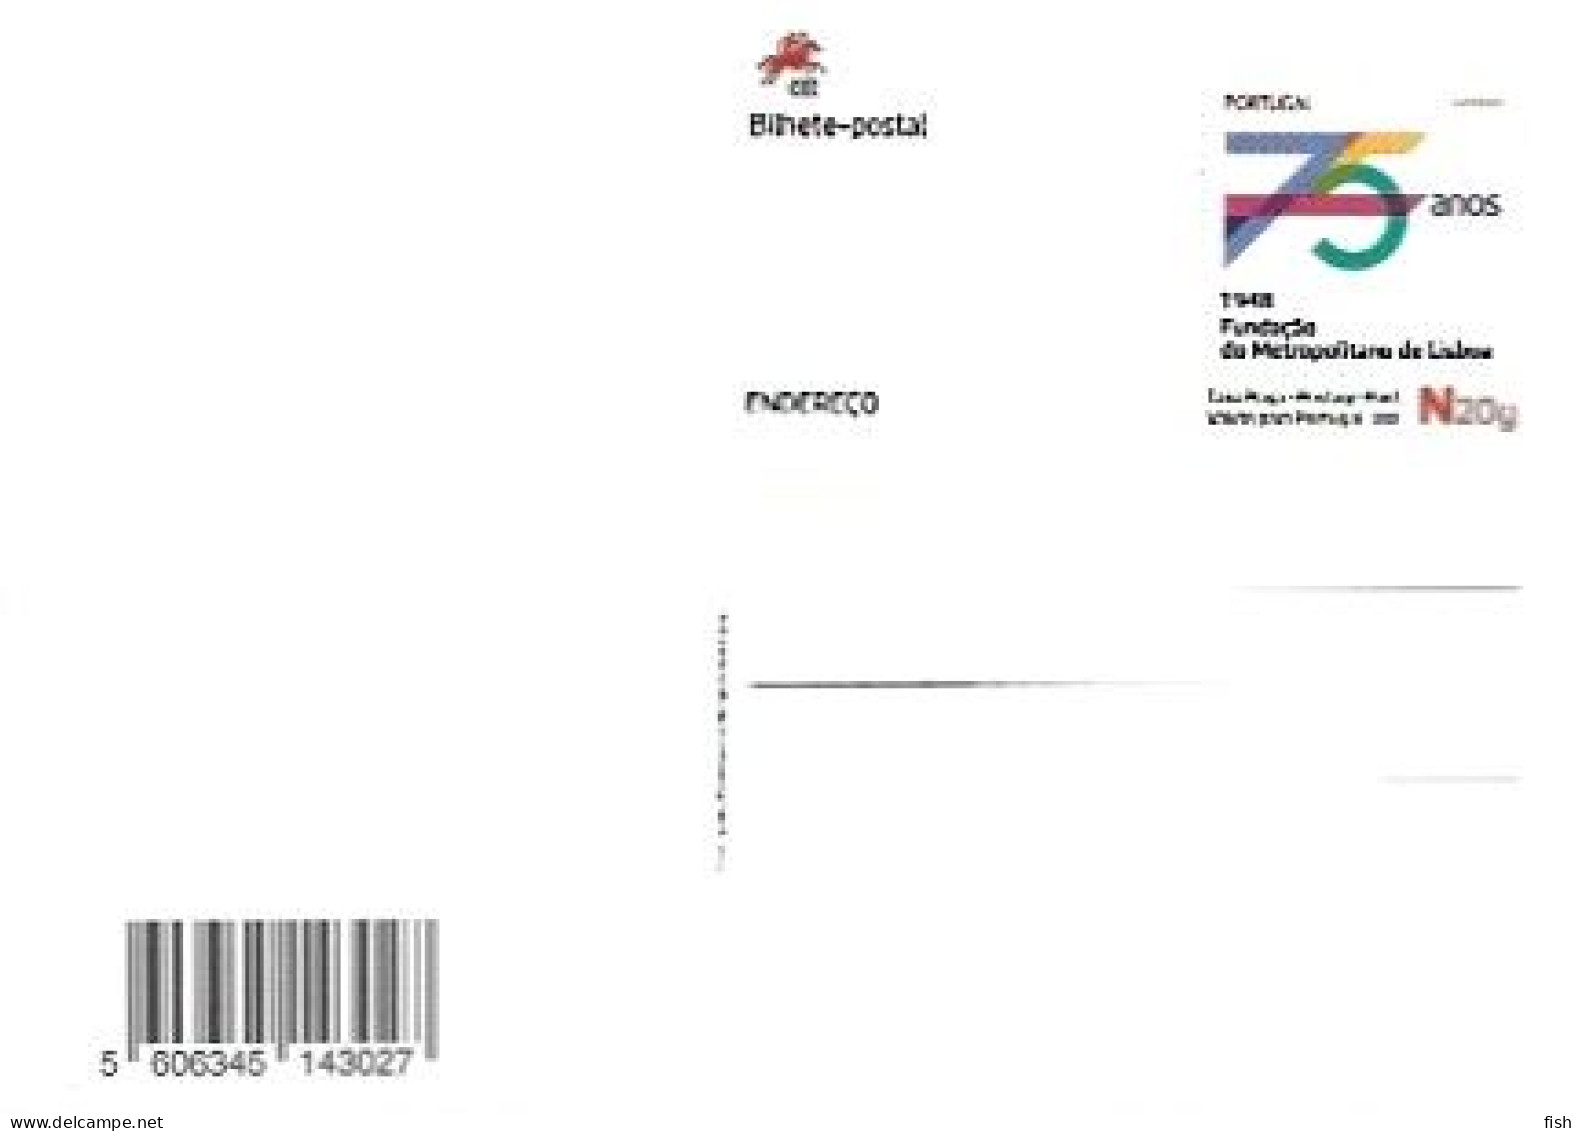 Portugal ** & Postal Stationery, 75 Years Of The Foundation Of The Metropolitan Of Lisbon 1948-2023 (799799) - Inaugurazioni